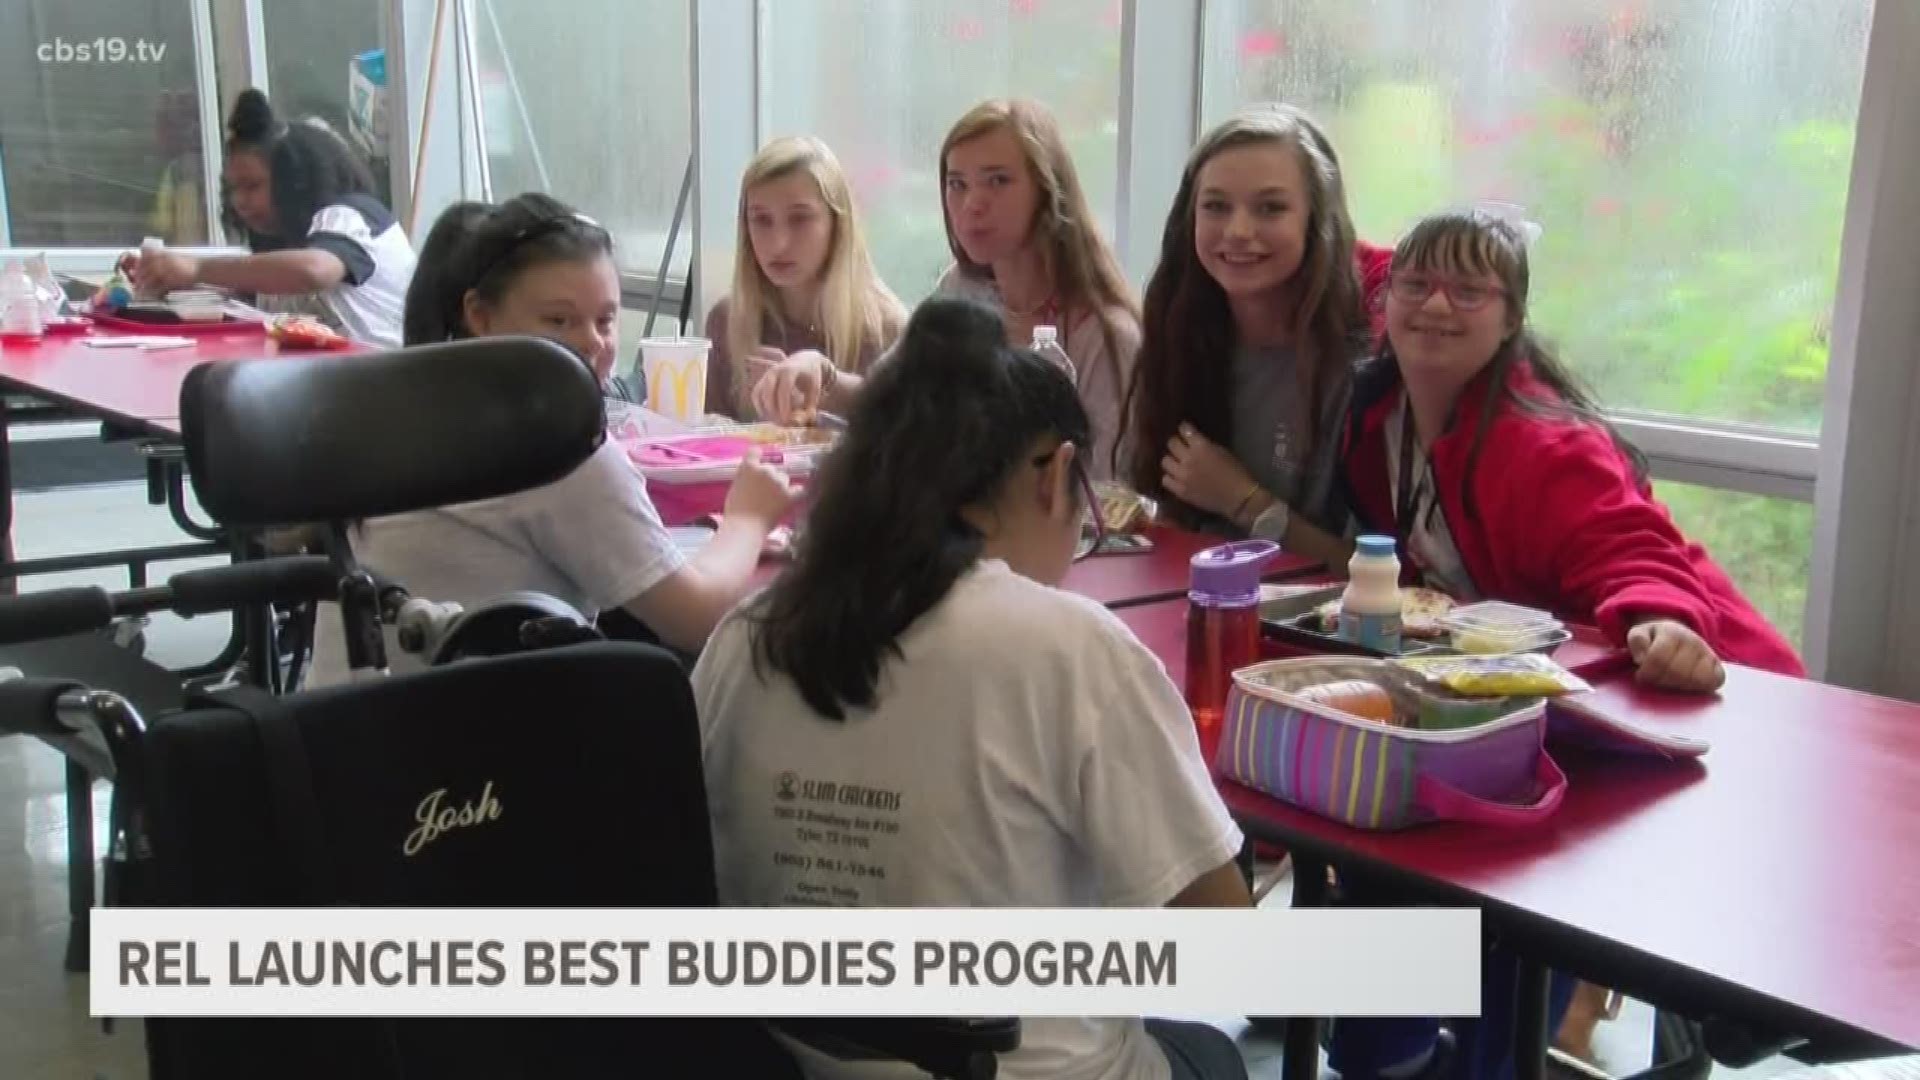 Robert E. Lee High School launched the "Best Buddies" program to help promote positive friendships throughout the entire student body. Through the national program, students learn to build one-to-one friendships with fellow classmates who have special nee